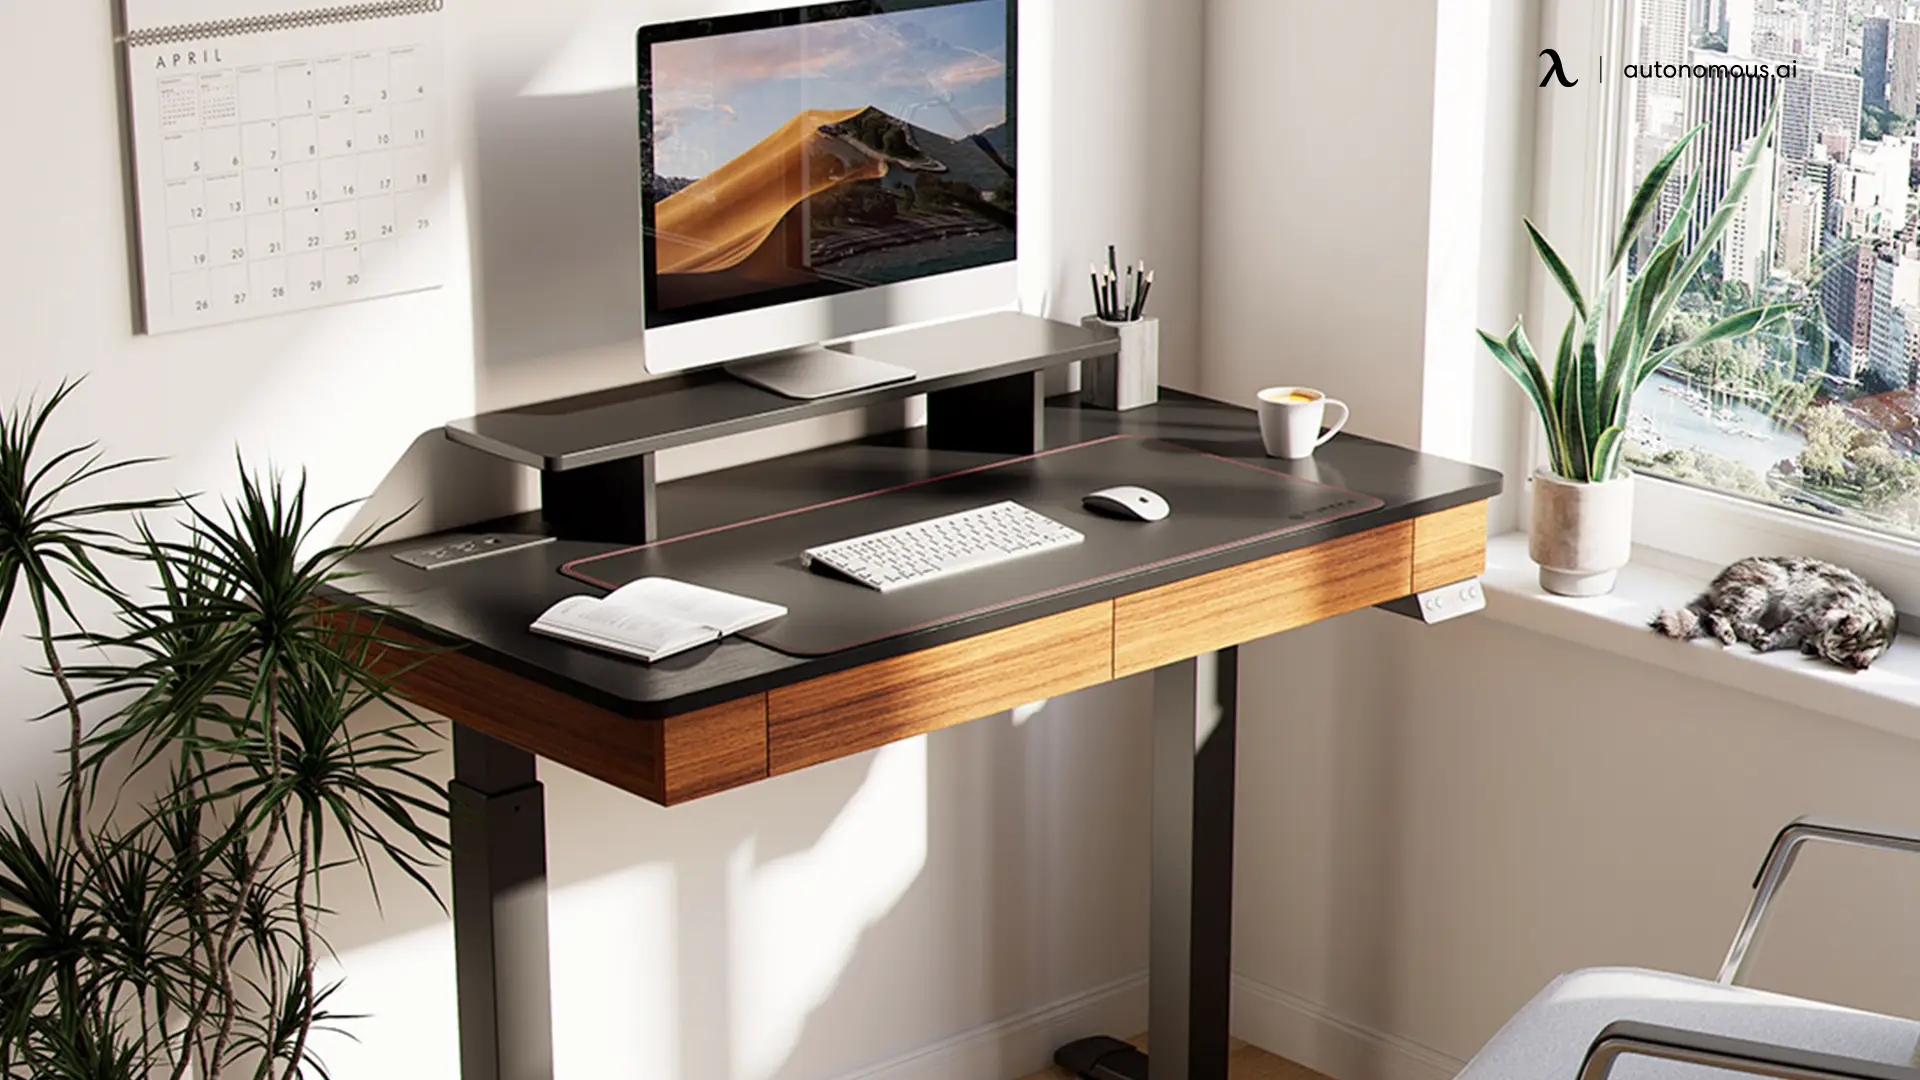 What Are The Benefits of Using a Eureka Ergonomic Desk?